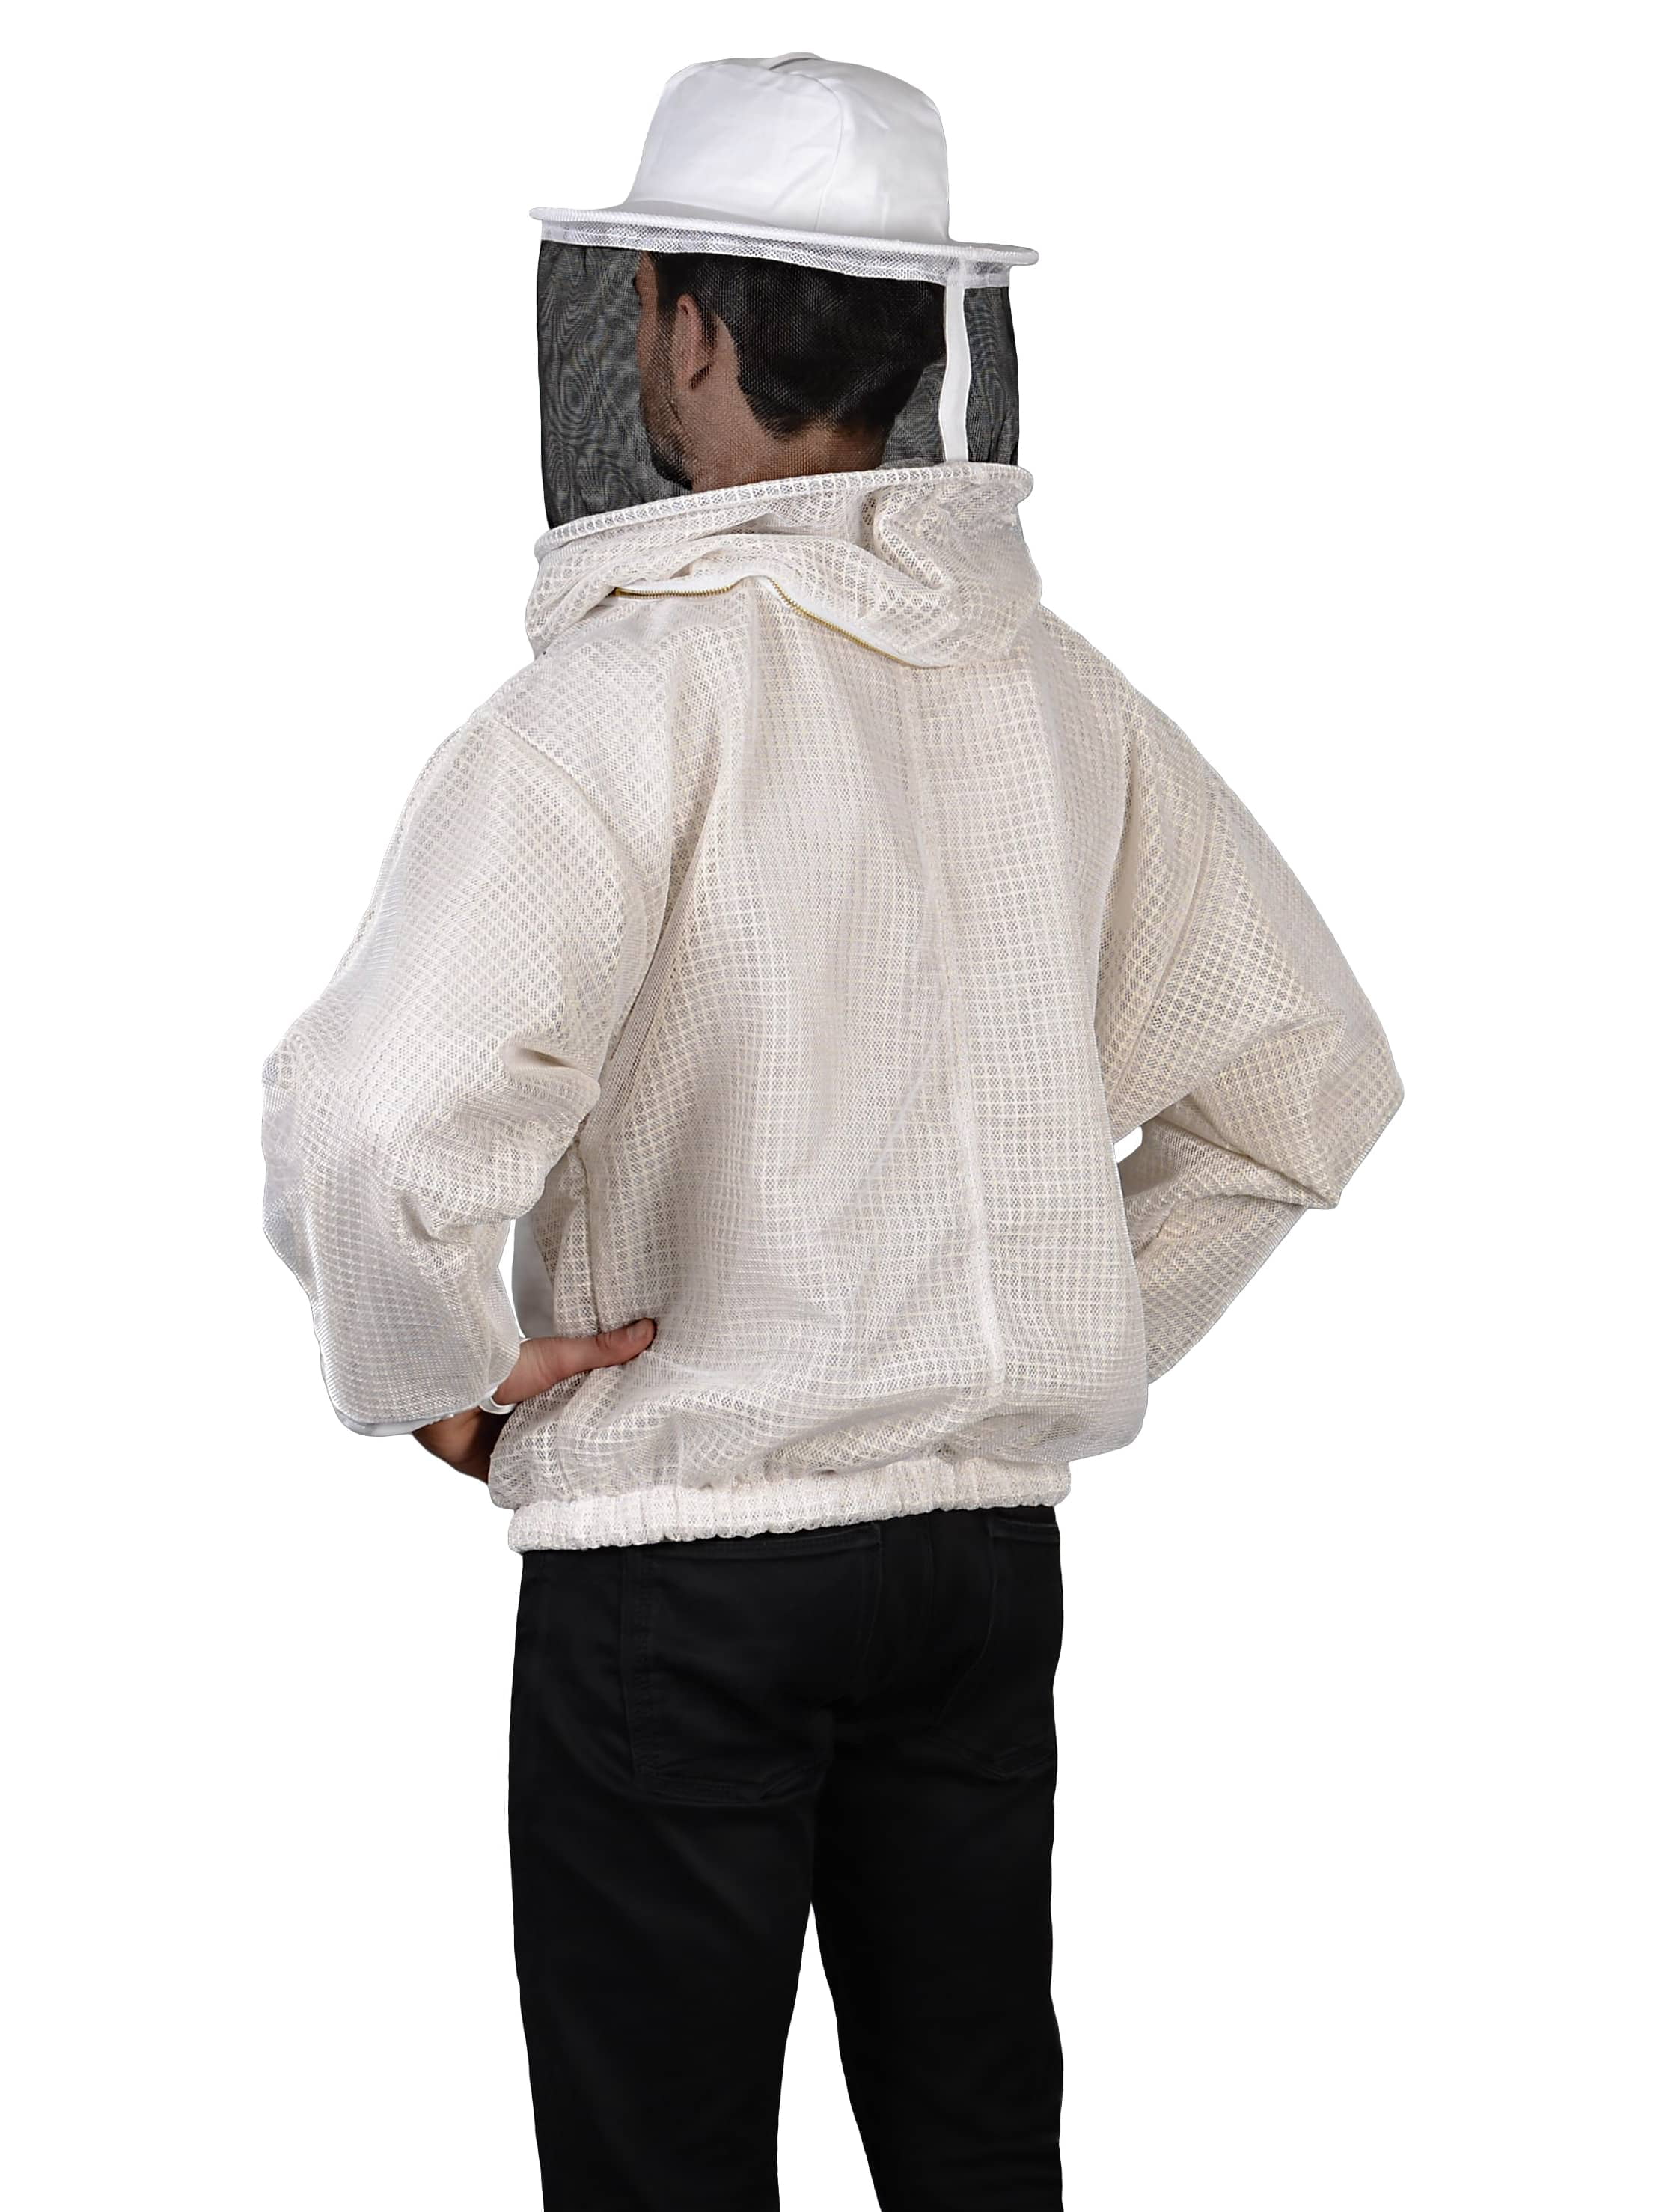 Humble Bee 312 Polycotton Beekeeping Jacket with Square Veil 